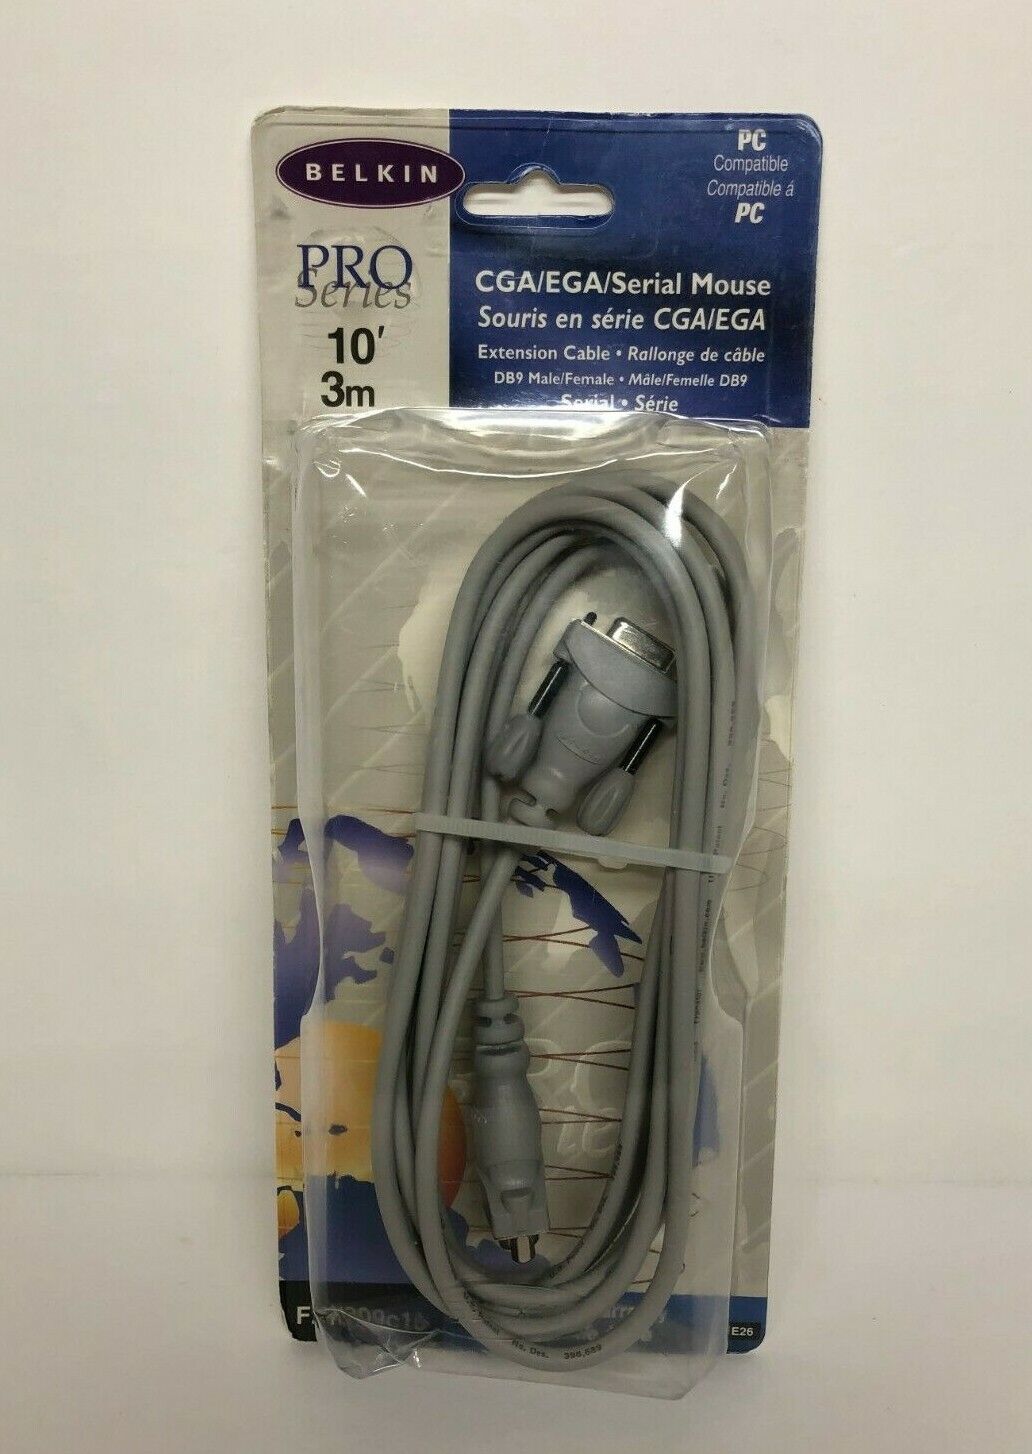 Serial Mouse Extension Cable Pro Belkin Series CGA / EGA 10 FT (3m) New Open Box